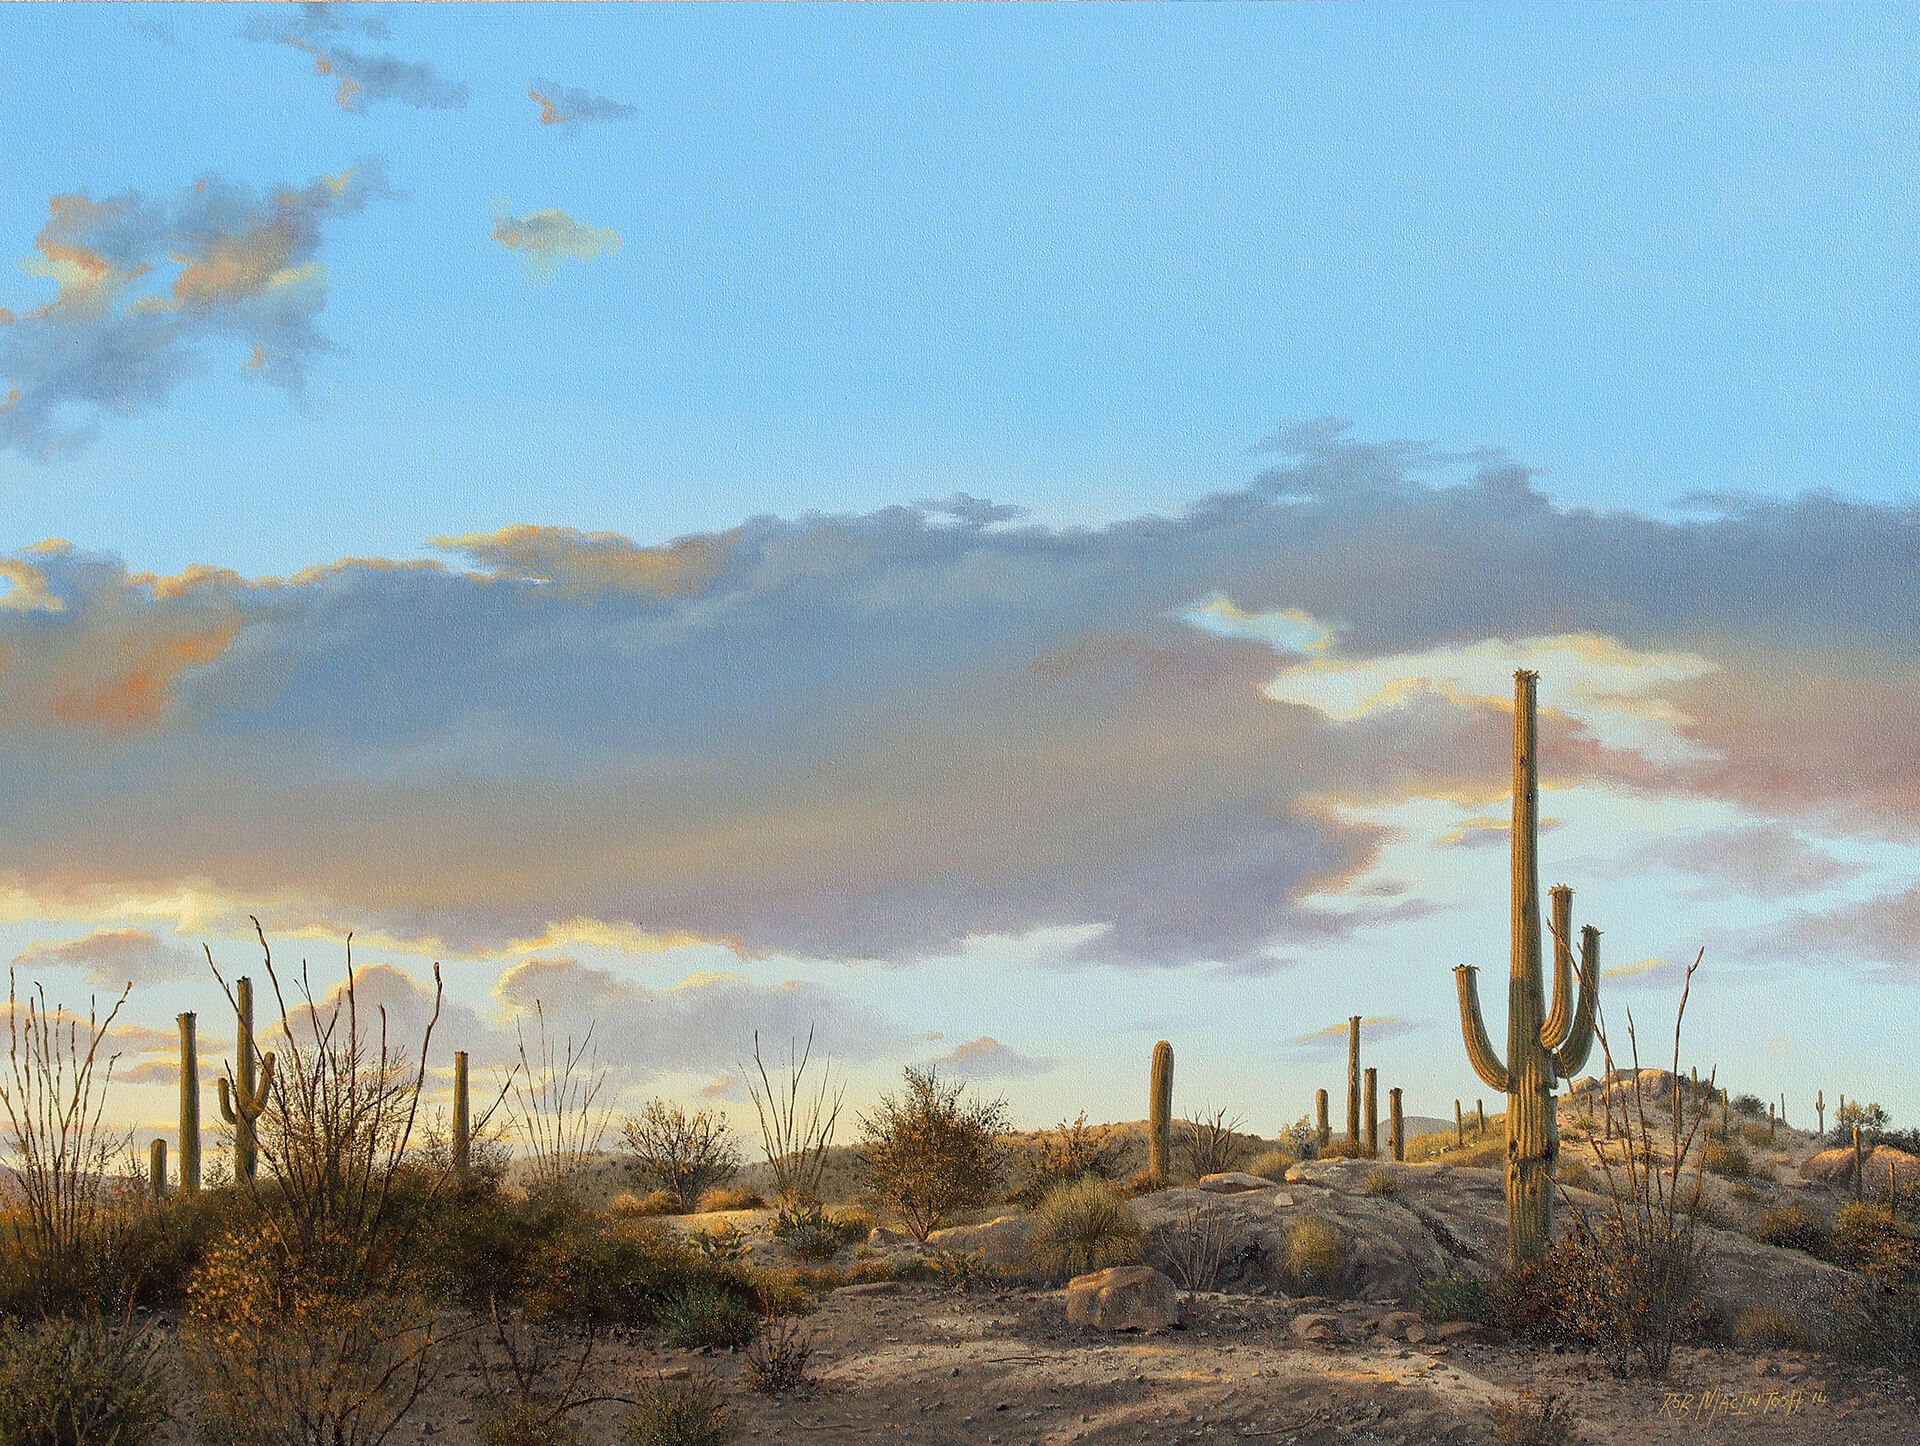 Photorealistic painting of the Sonoran Desert in late afternoon